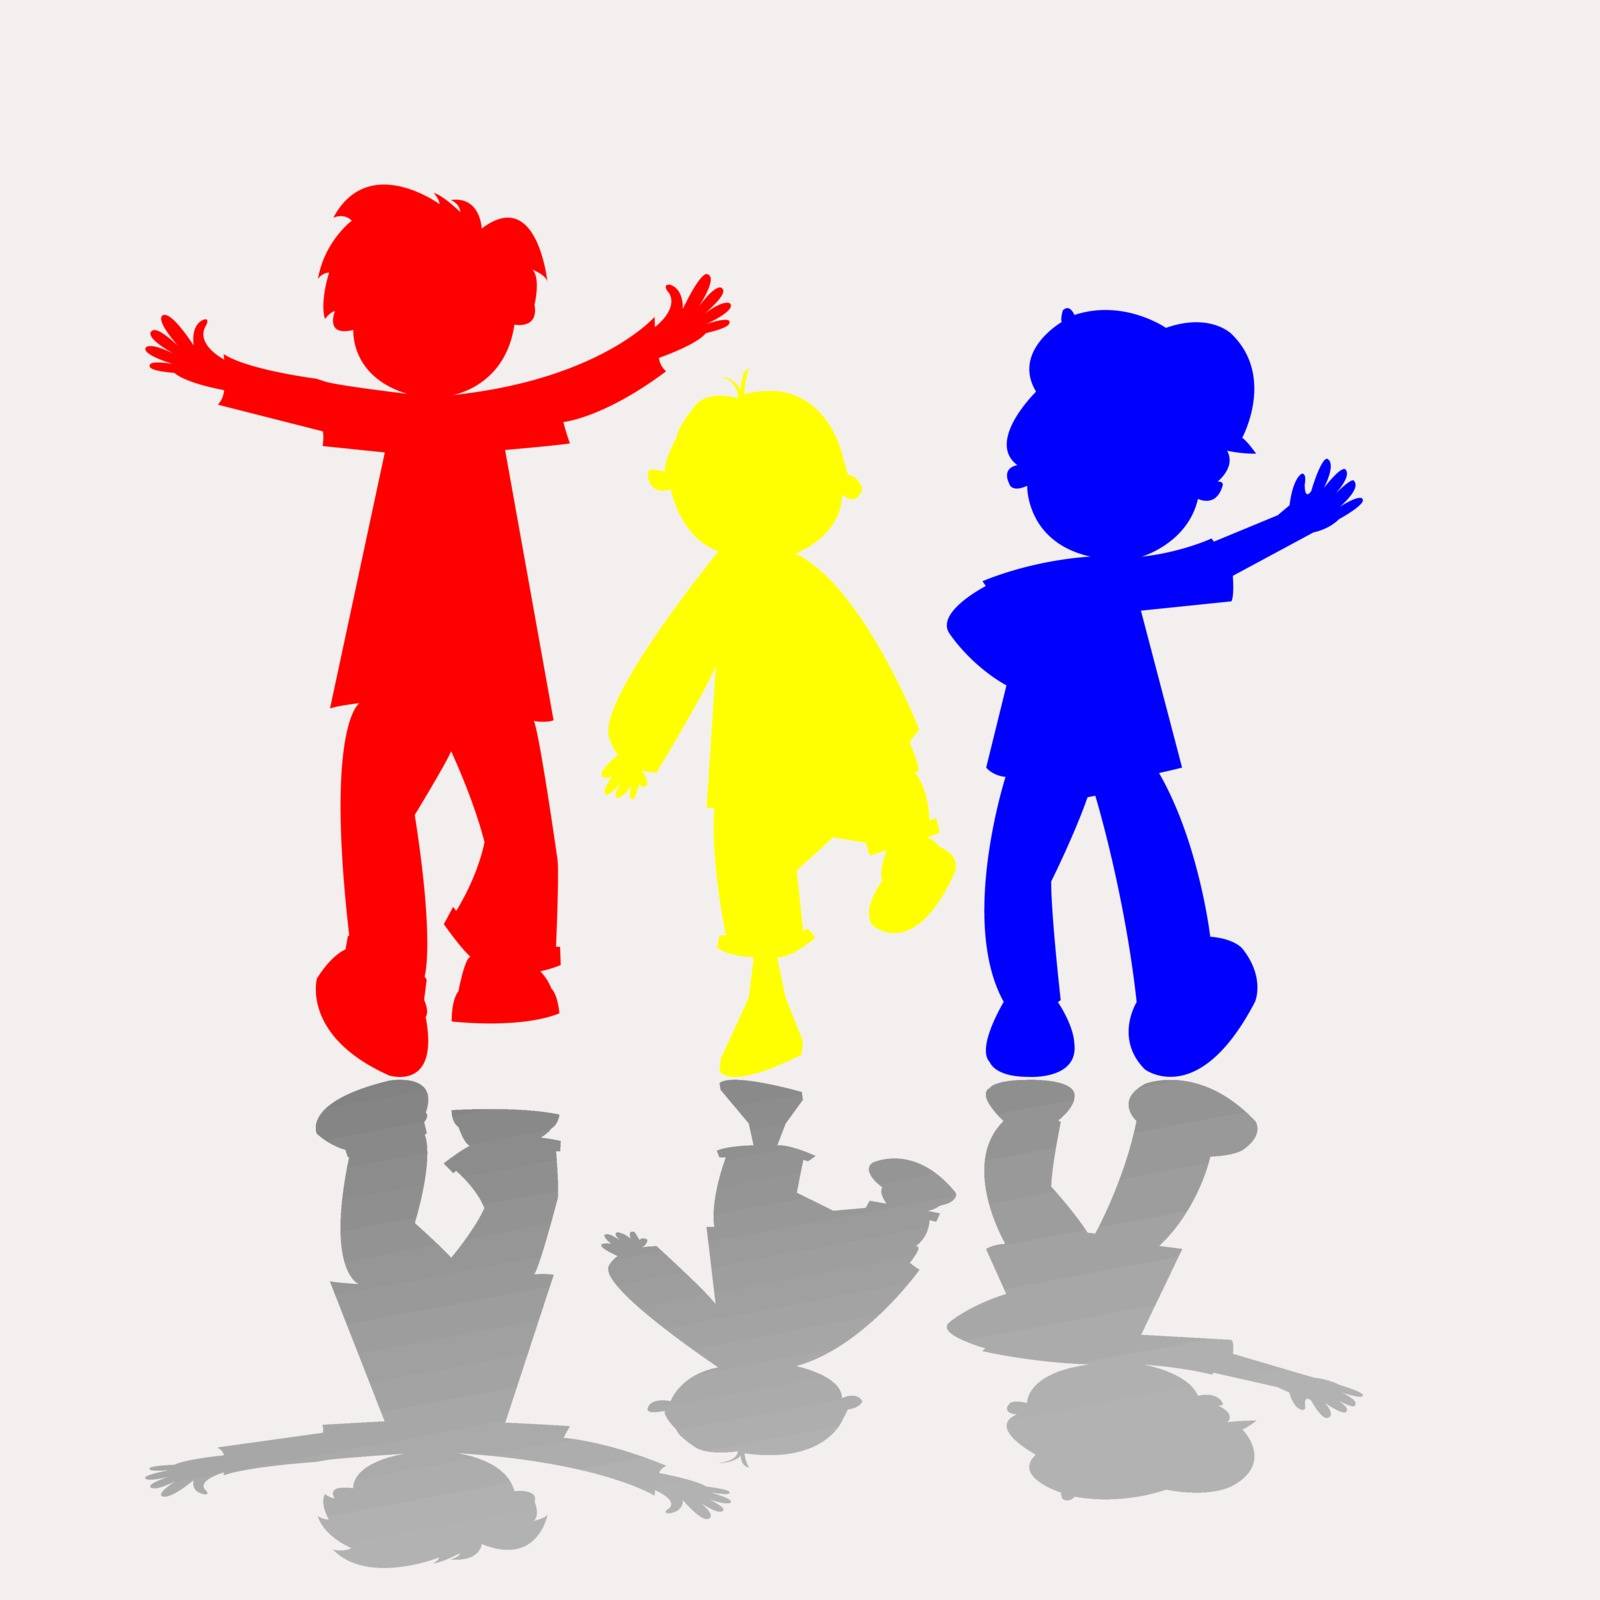 colored kids silhouettes, vector art illustration